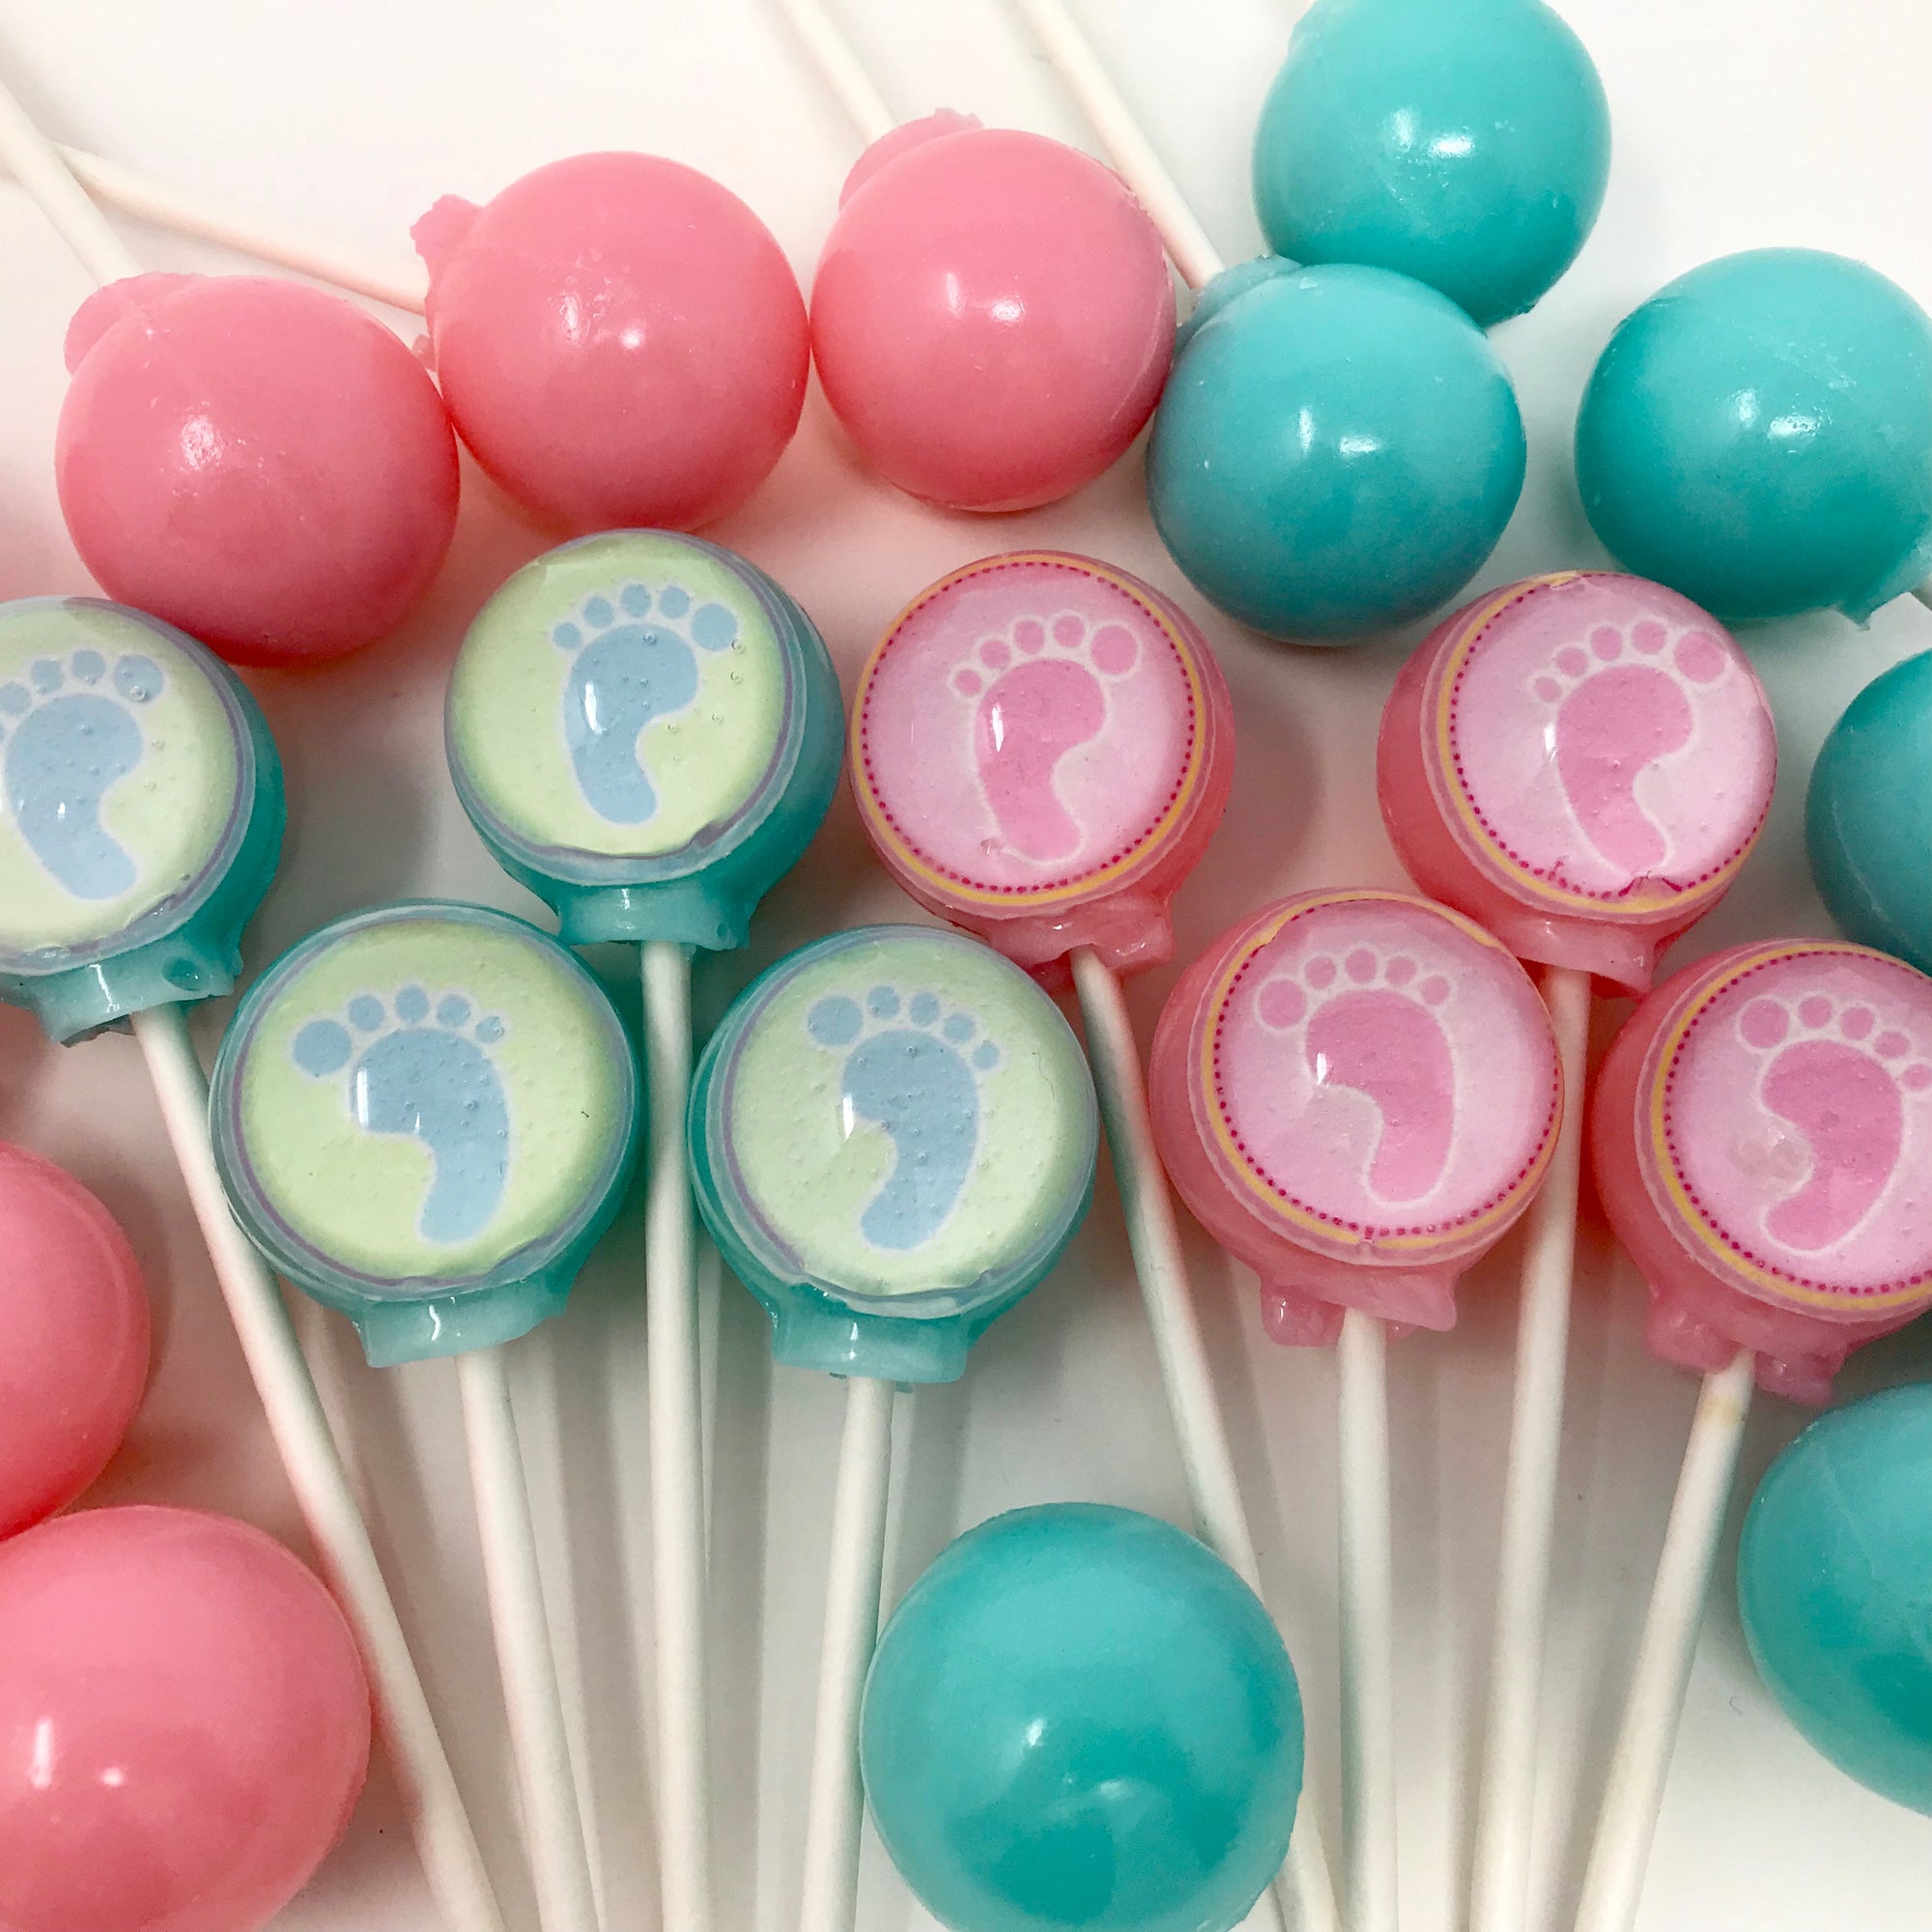 Baby Footprint Lollipop 6-piece set by I Want Candy!